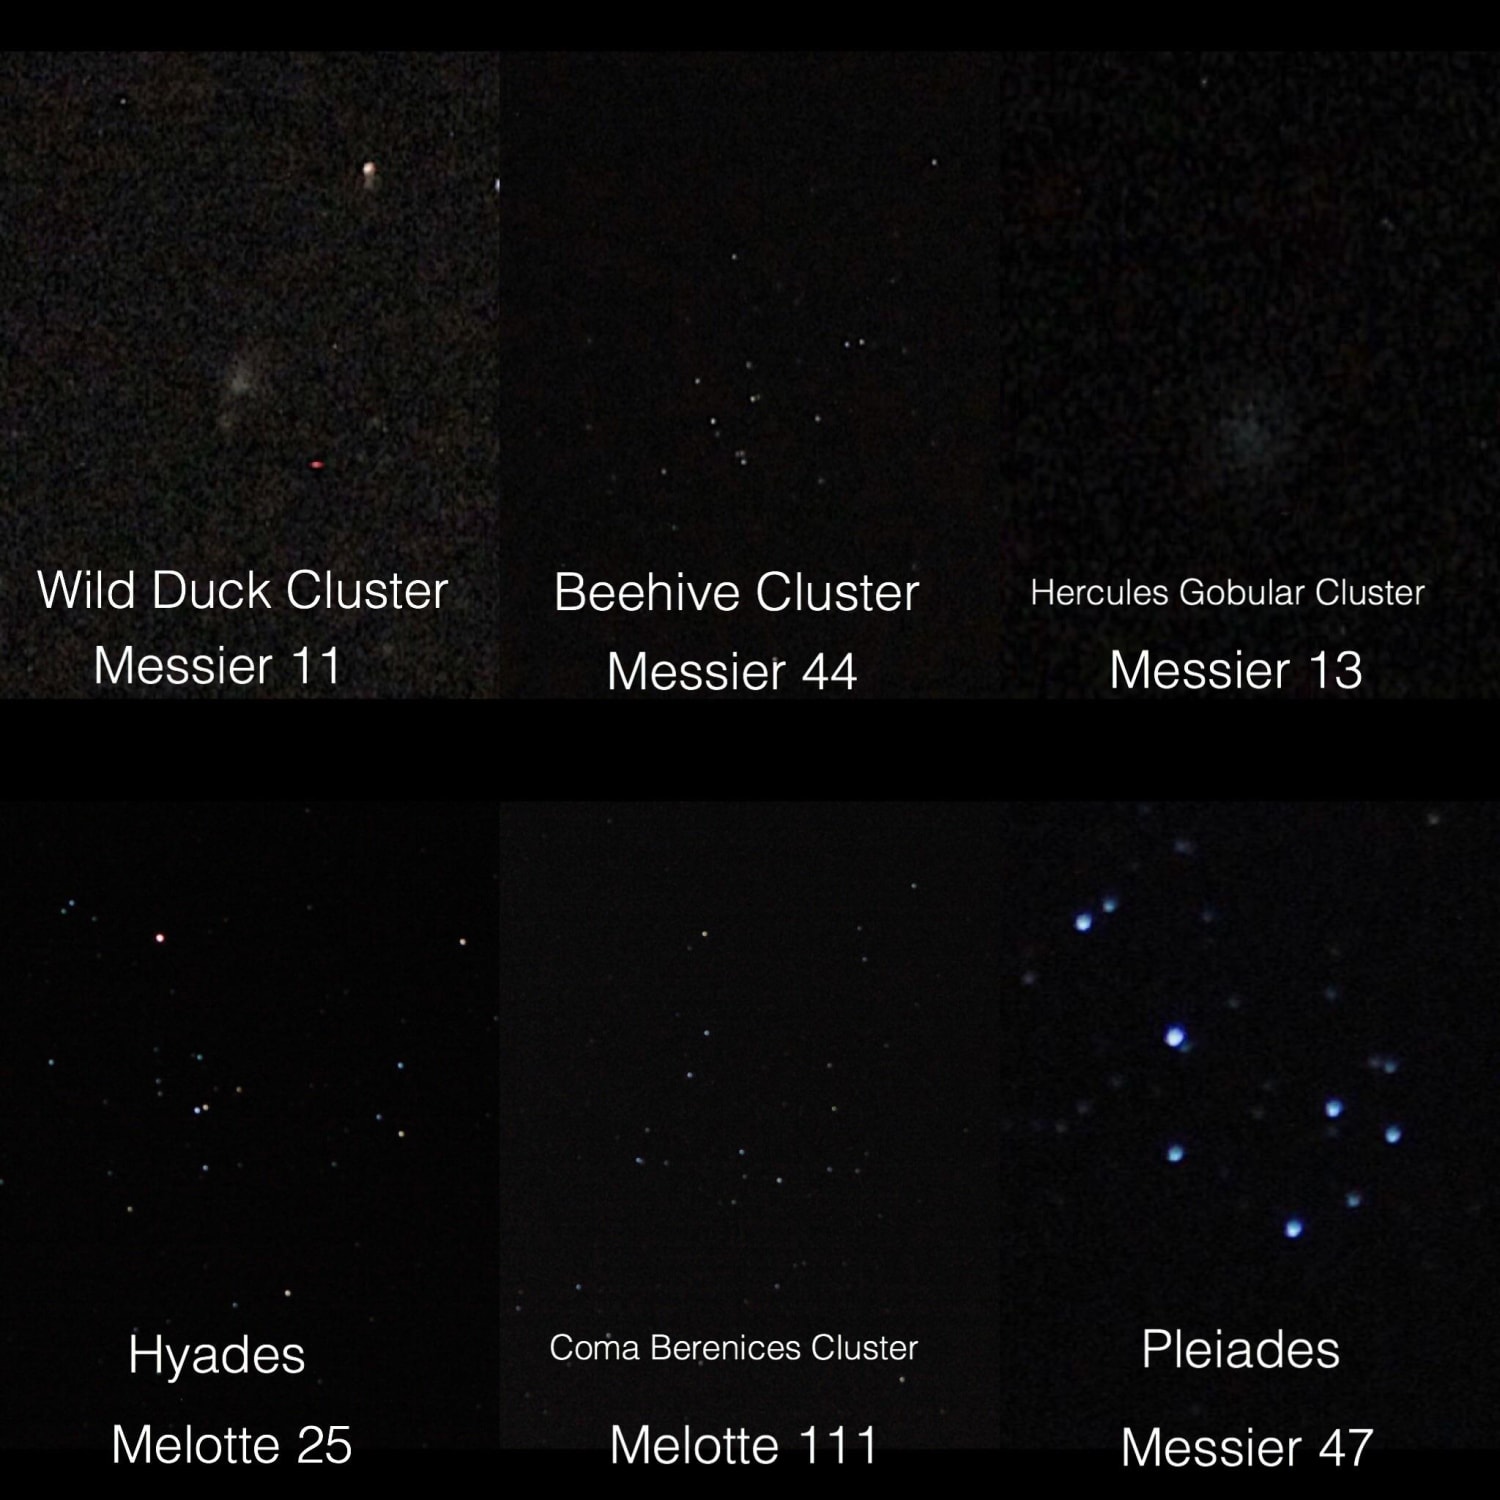 Star clusters from a DSLR